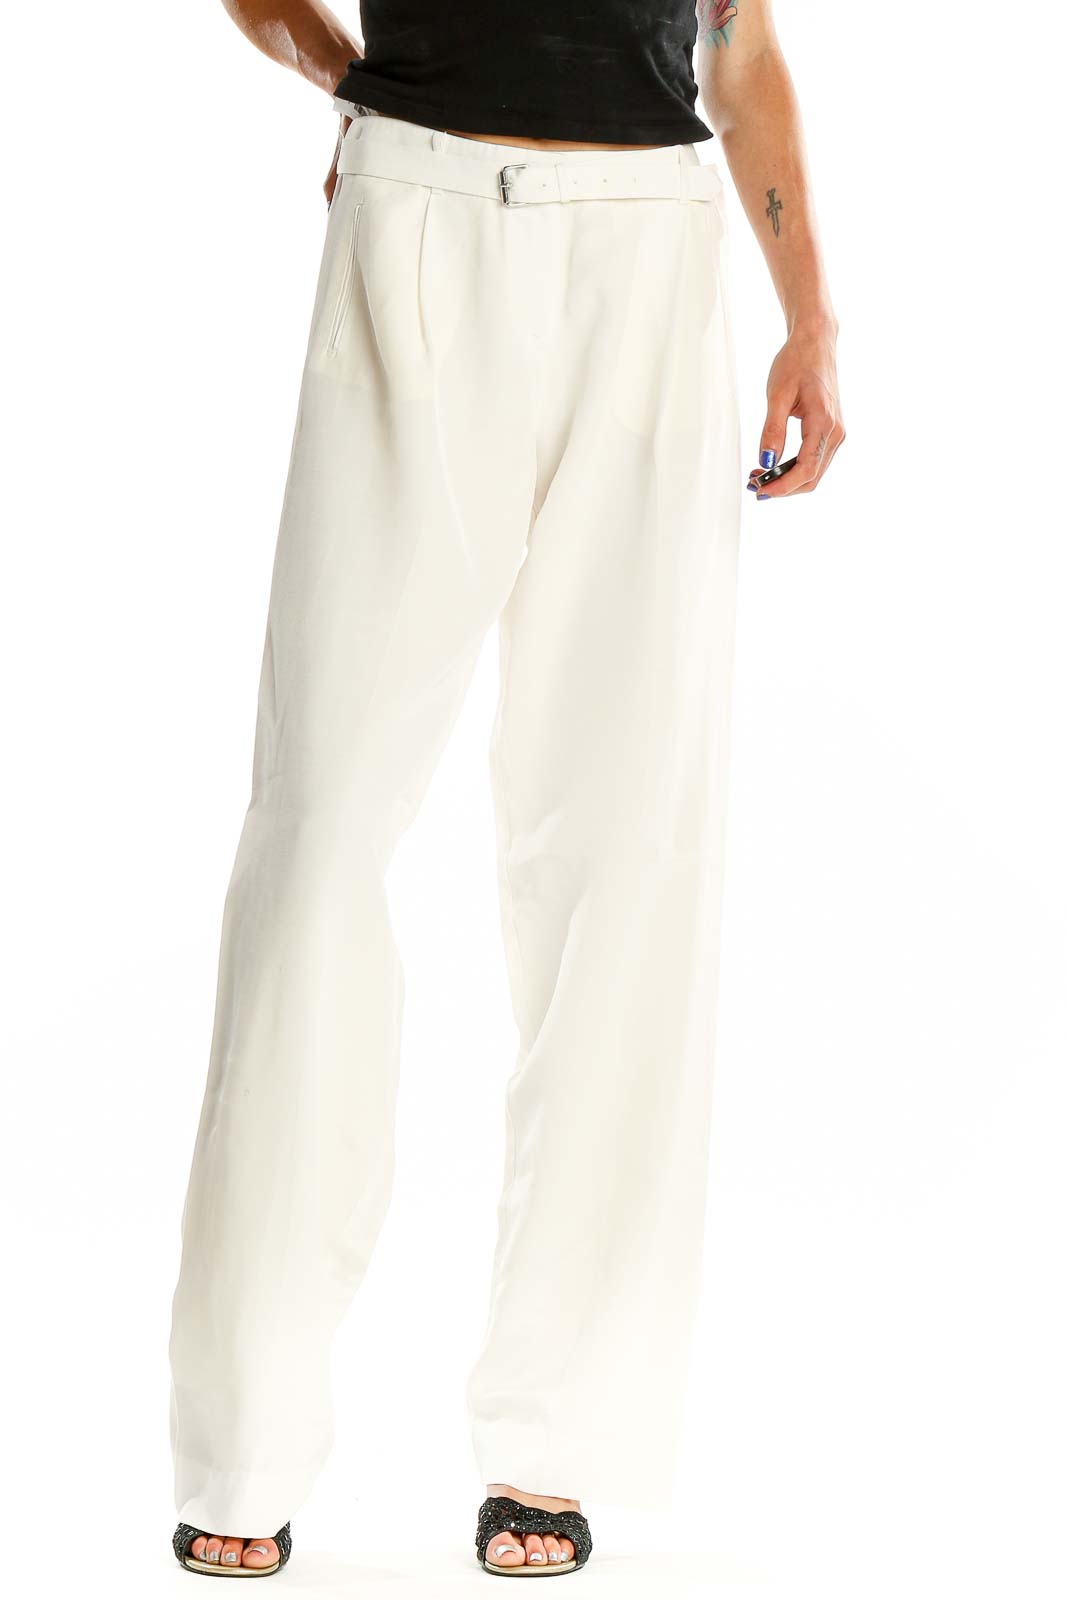 White Chic Straight Leg Trousers Front